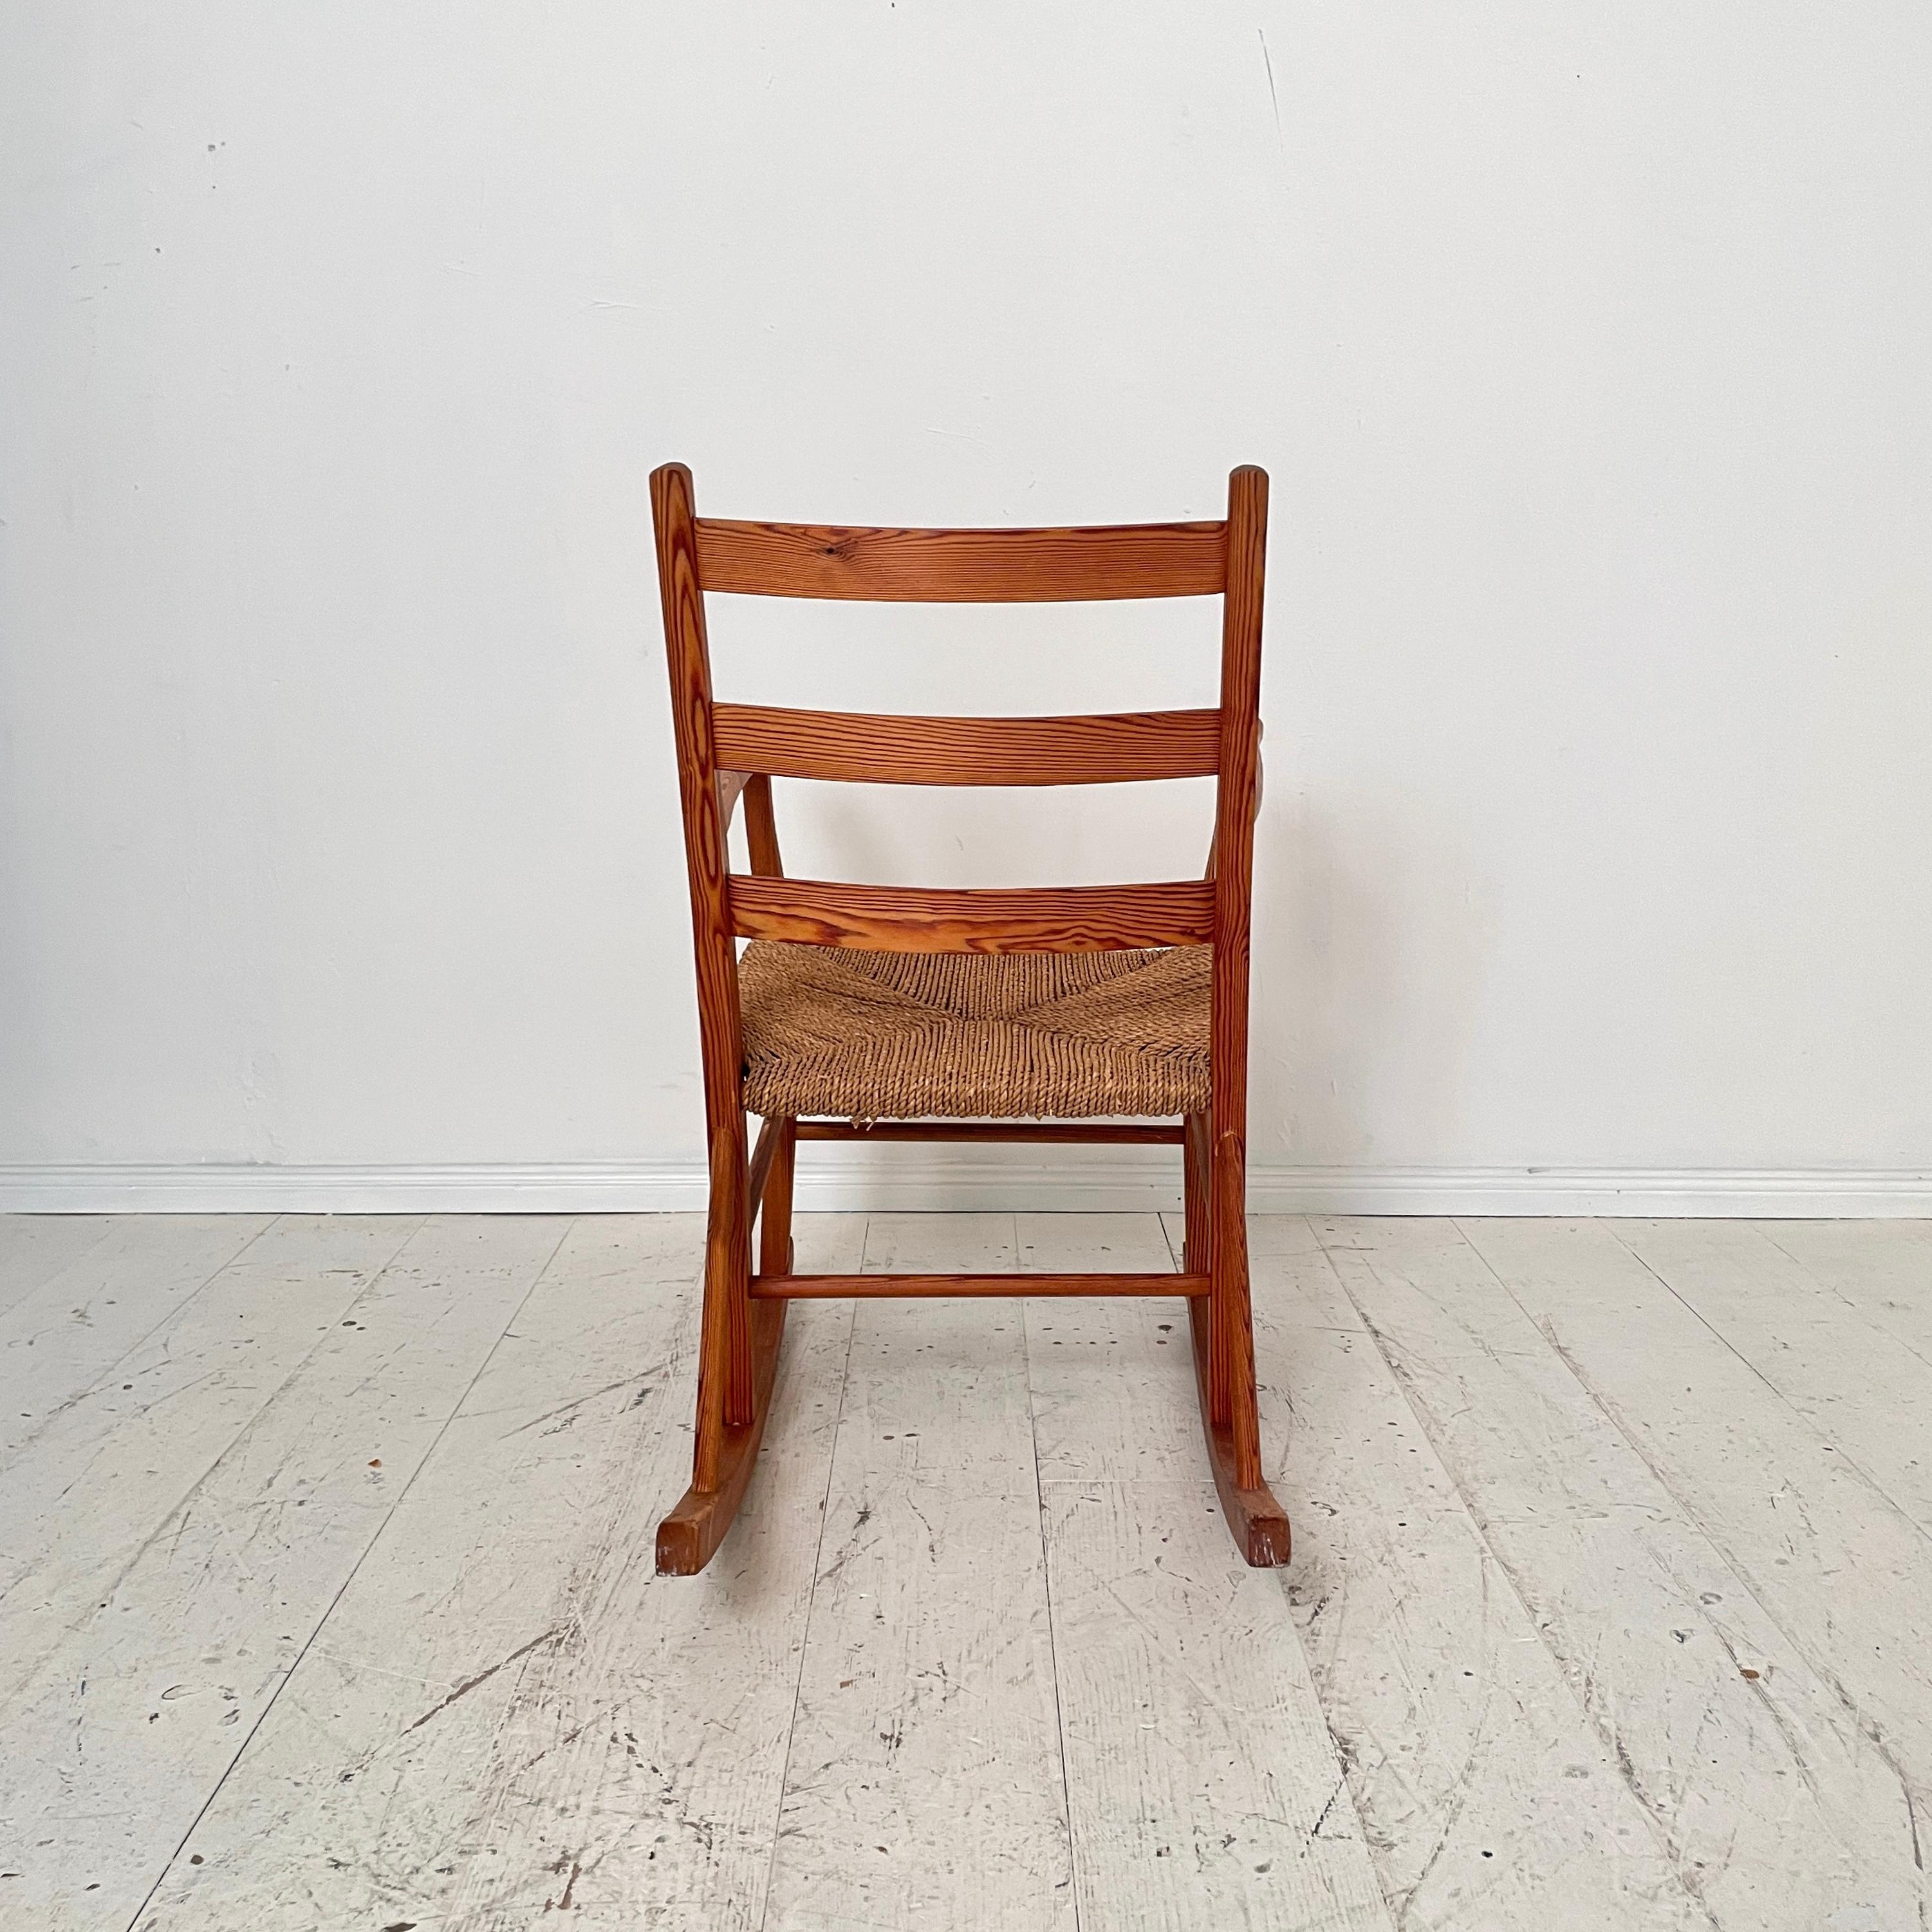 Norwegian Rocking Chair by Aksel Hansson in Pine, 1930 For Sale 3